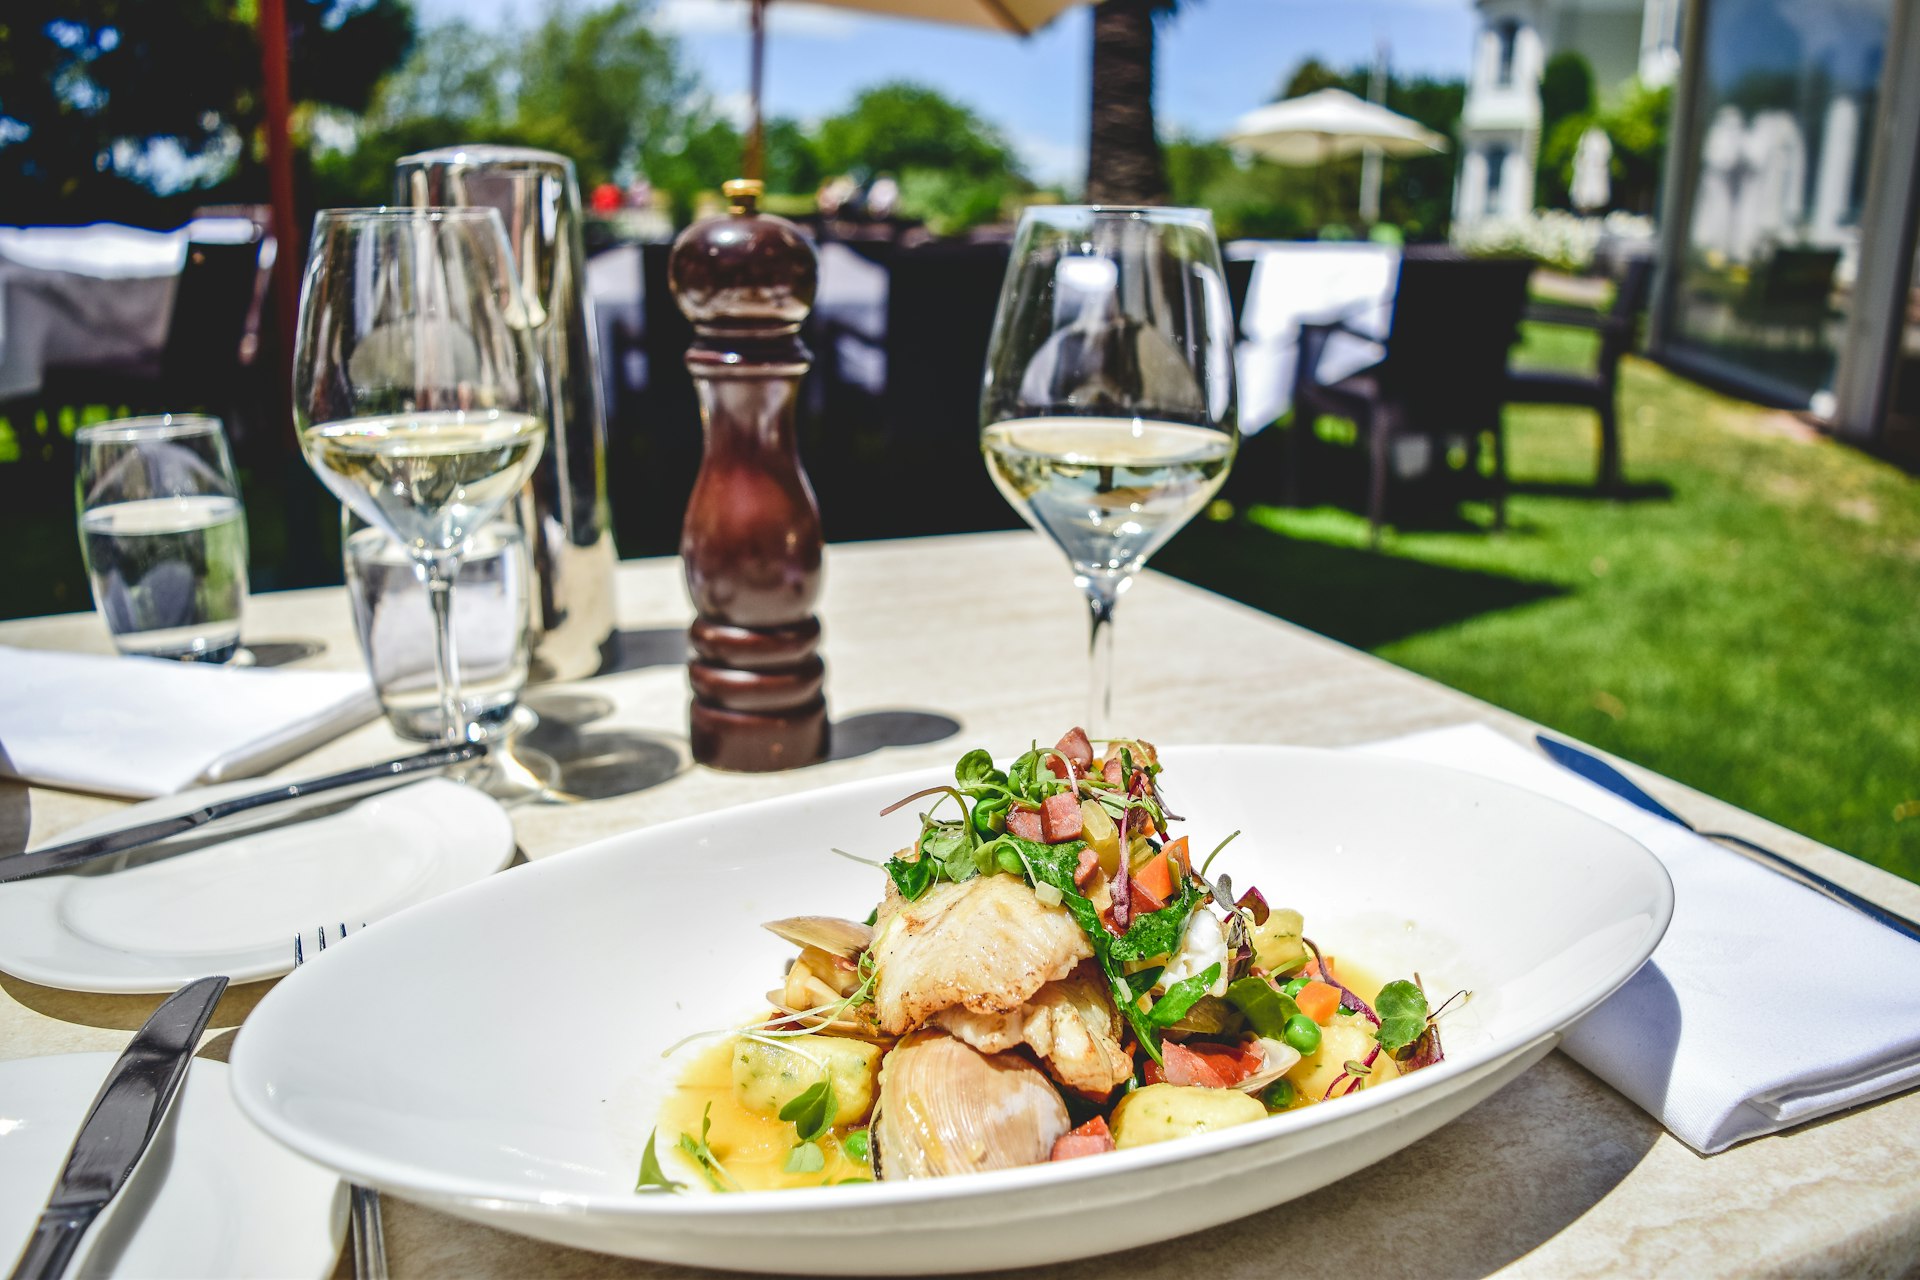 Lunch served at the Mission Winery in New Zealand's Napier region